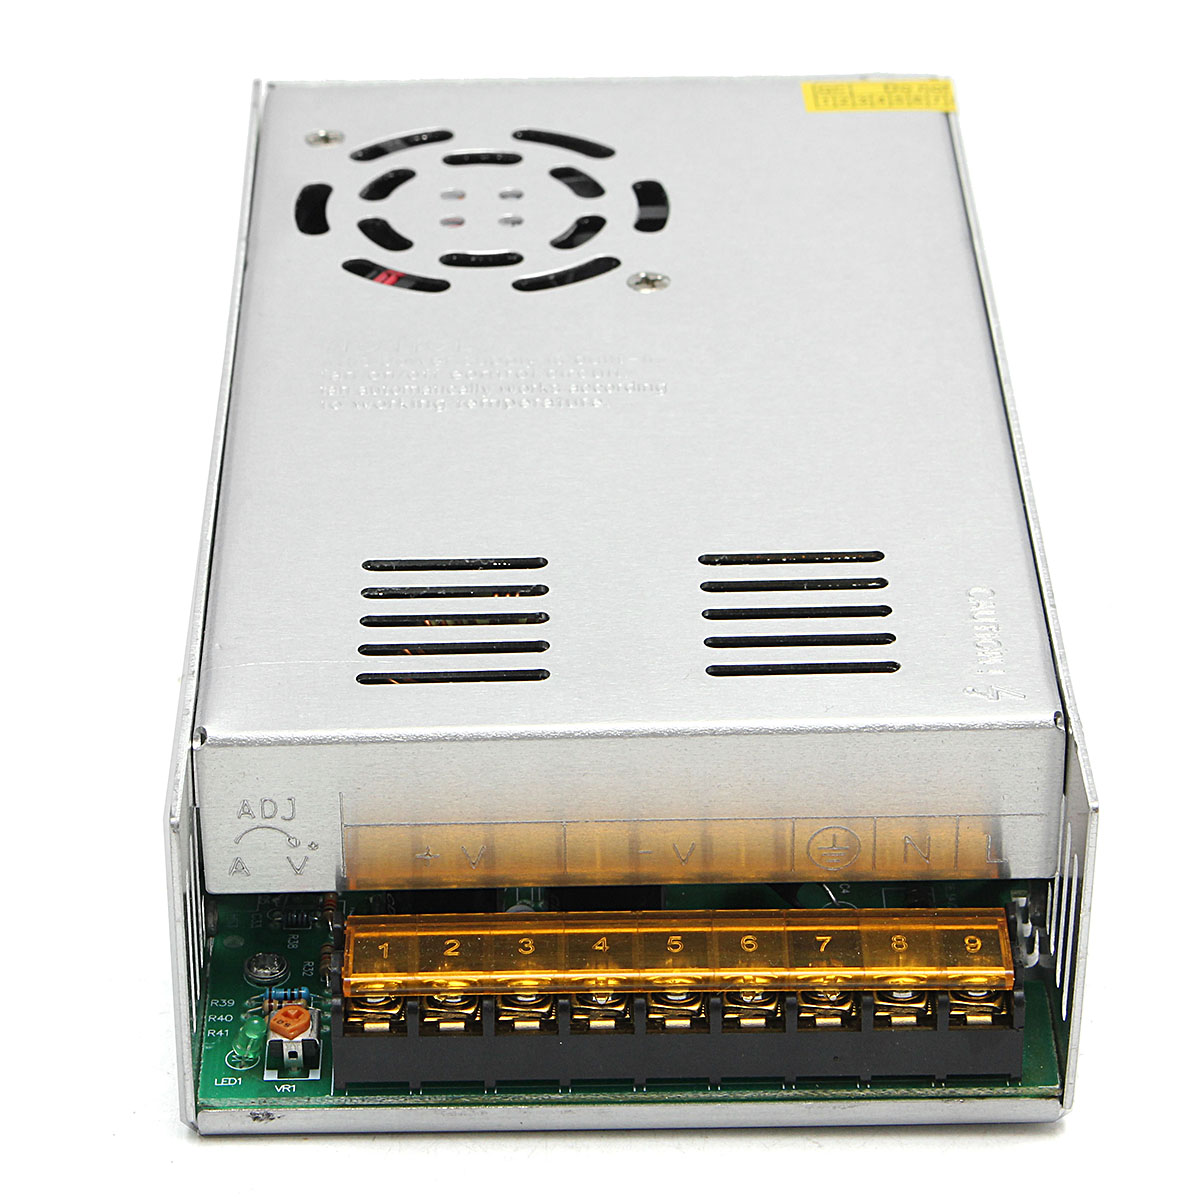 Geekcreitreg-AC-110-240V-Input-To-DC-24V-17A-400W-Switching-Power-Supply-Driver-Board-1272112-3